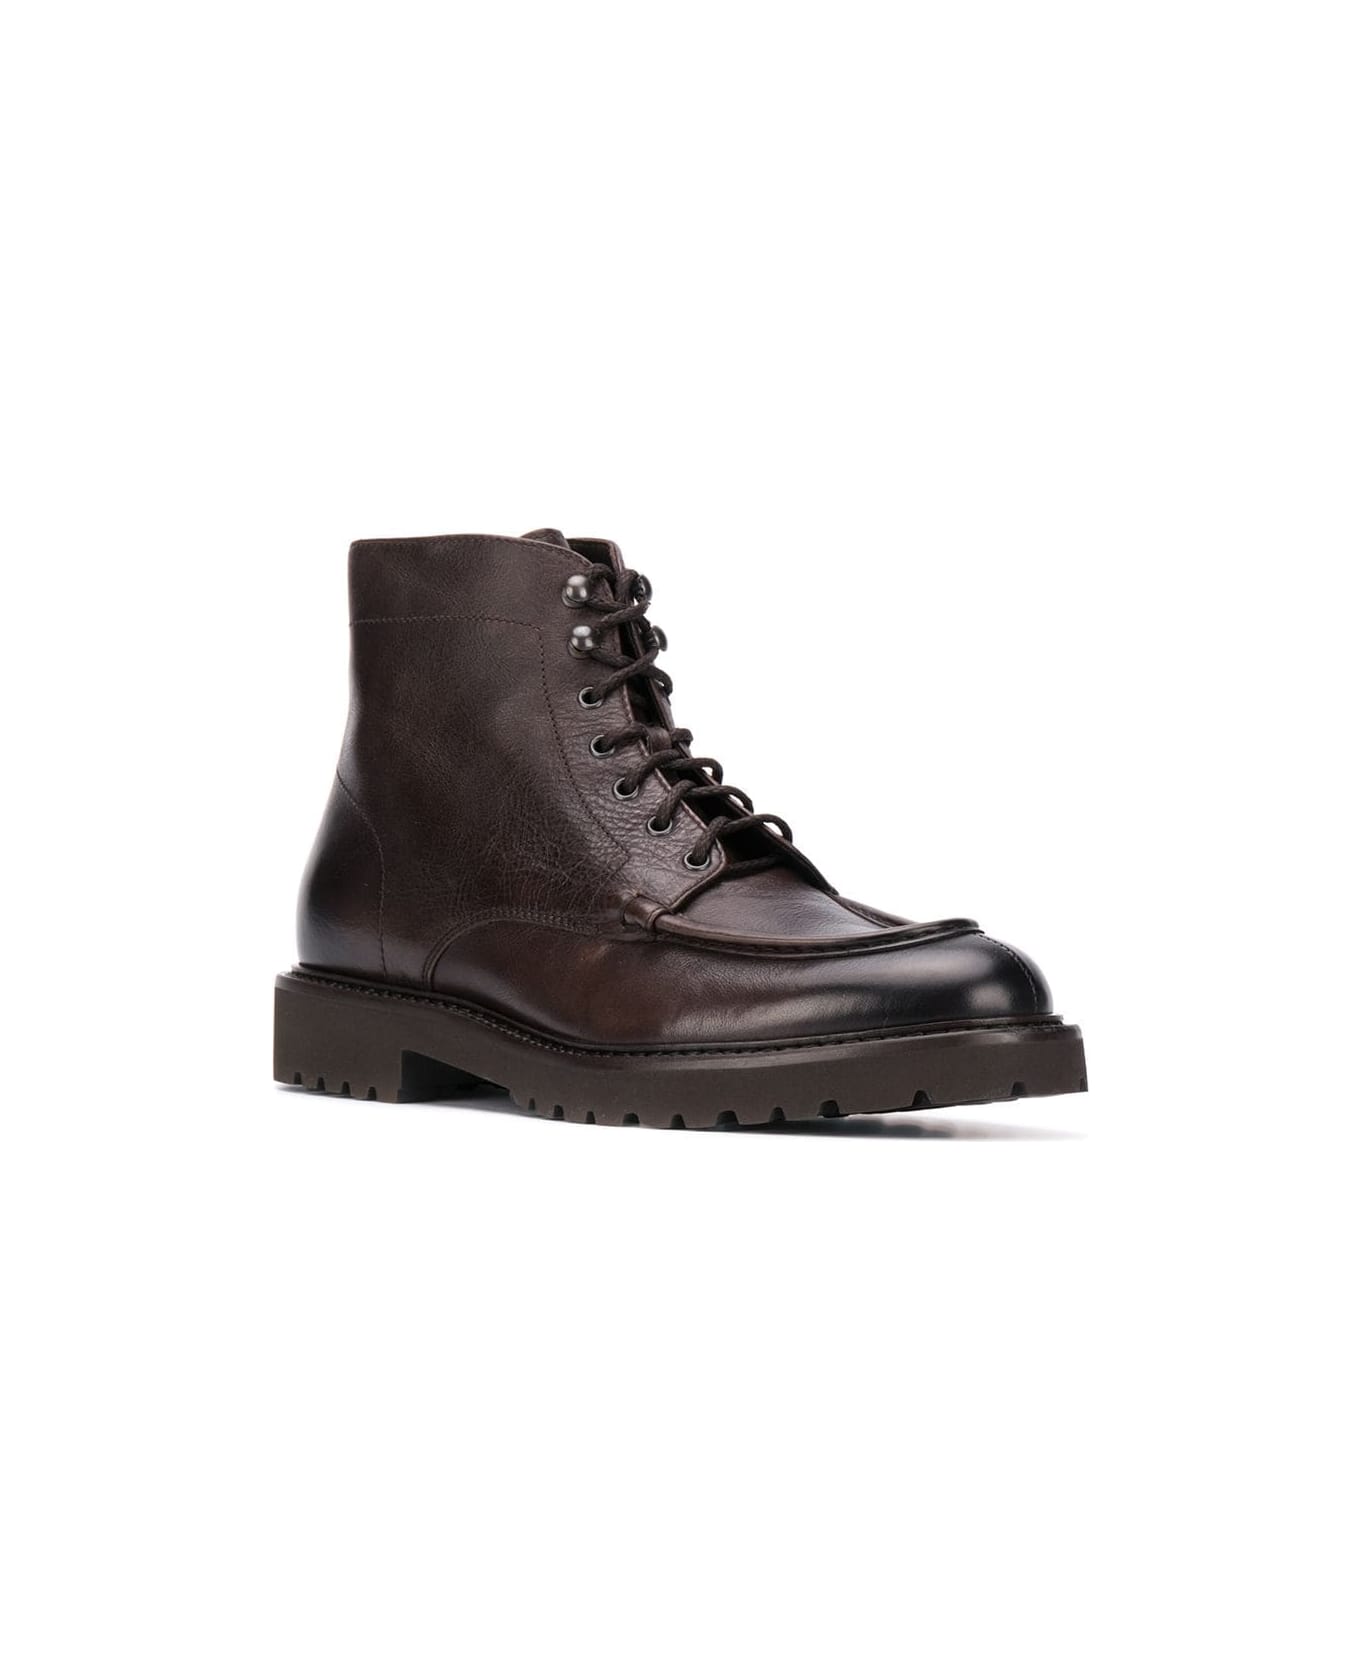 Doucal's Triumph Broadside Derby Boots - Brown